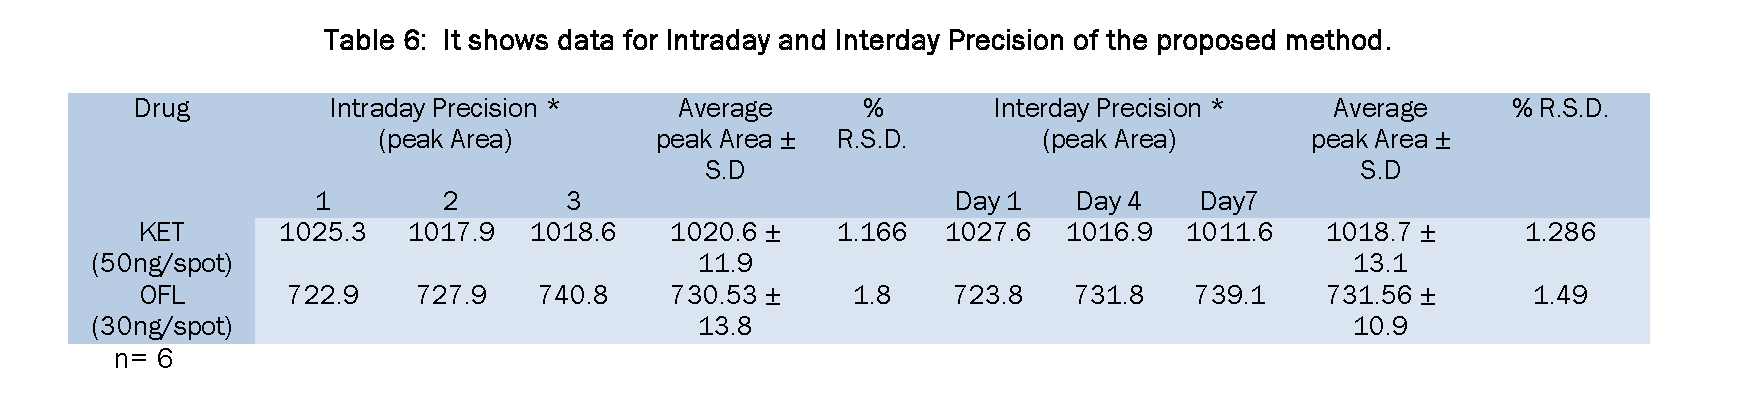 Pharmaceutical-Analysis-It-shows-data-Intraday-and-Interday-Precision-proposed-method